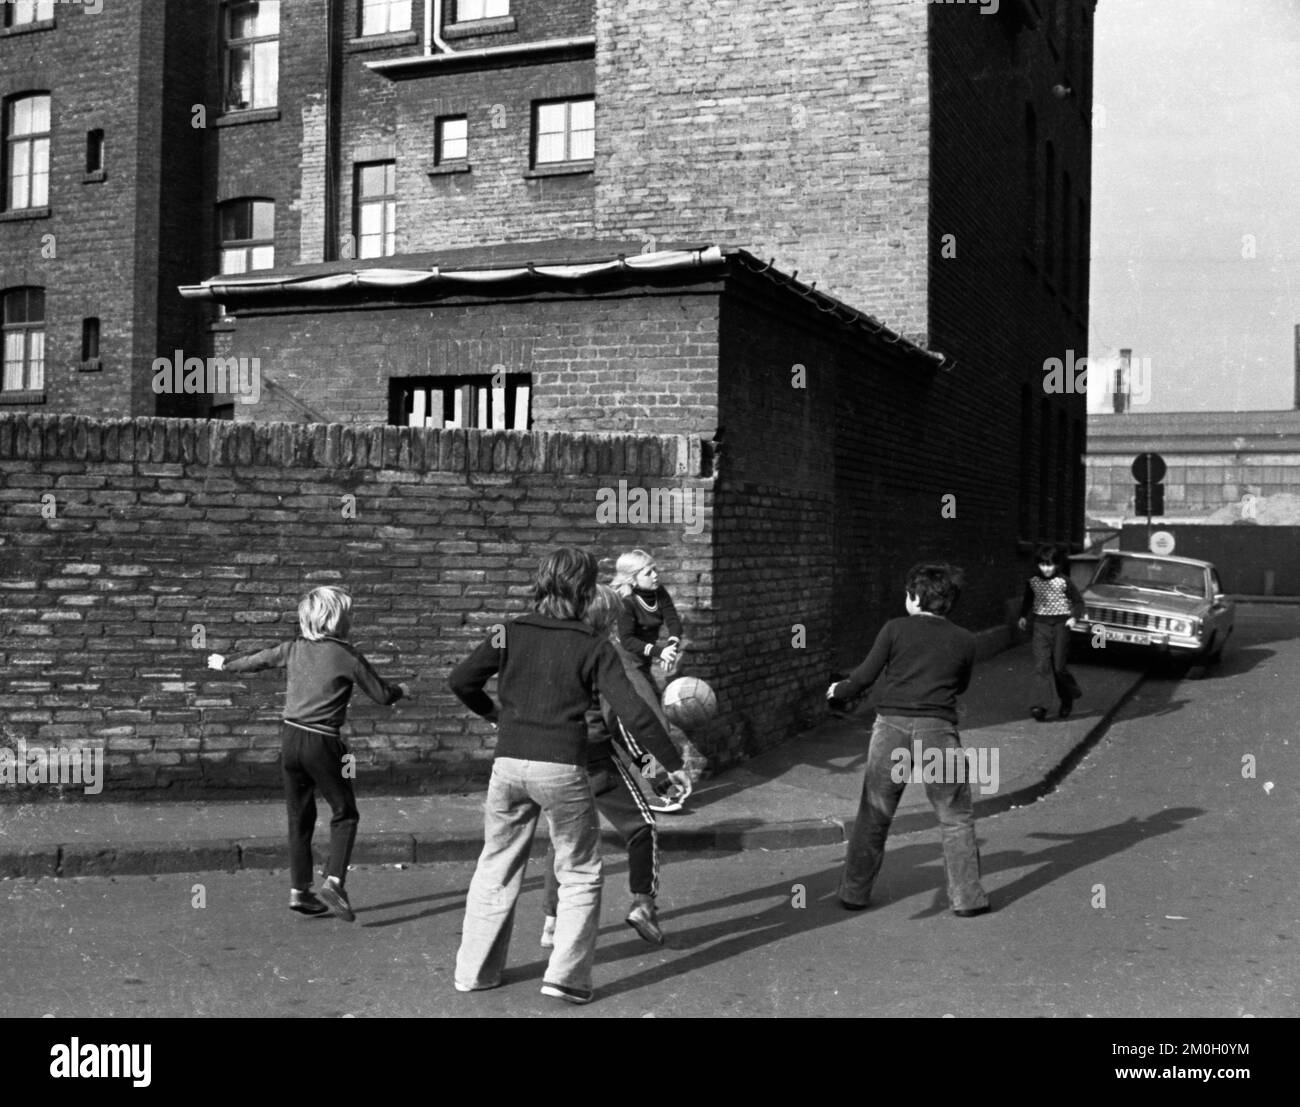 The Ruhr area, country and people, work, life, leisure in the area in 1976.colliery settlement, Germany, Europe Stock Photo